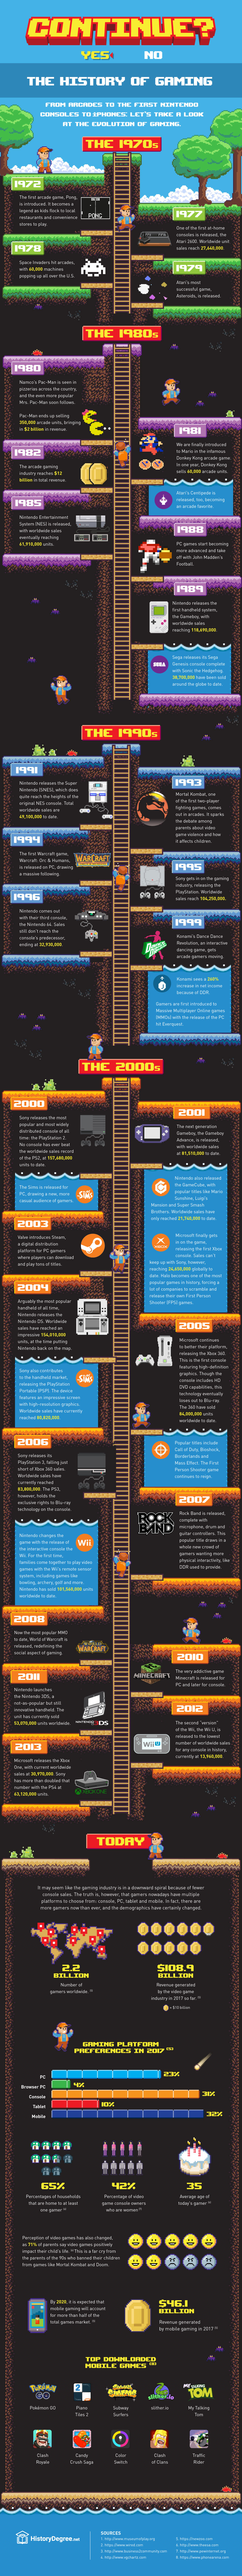 history of gaming history of videogaming video game history to now 